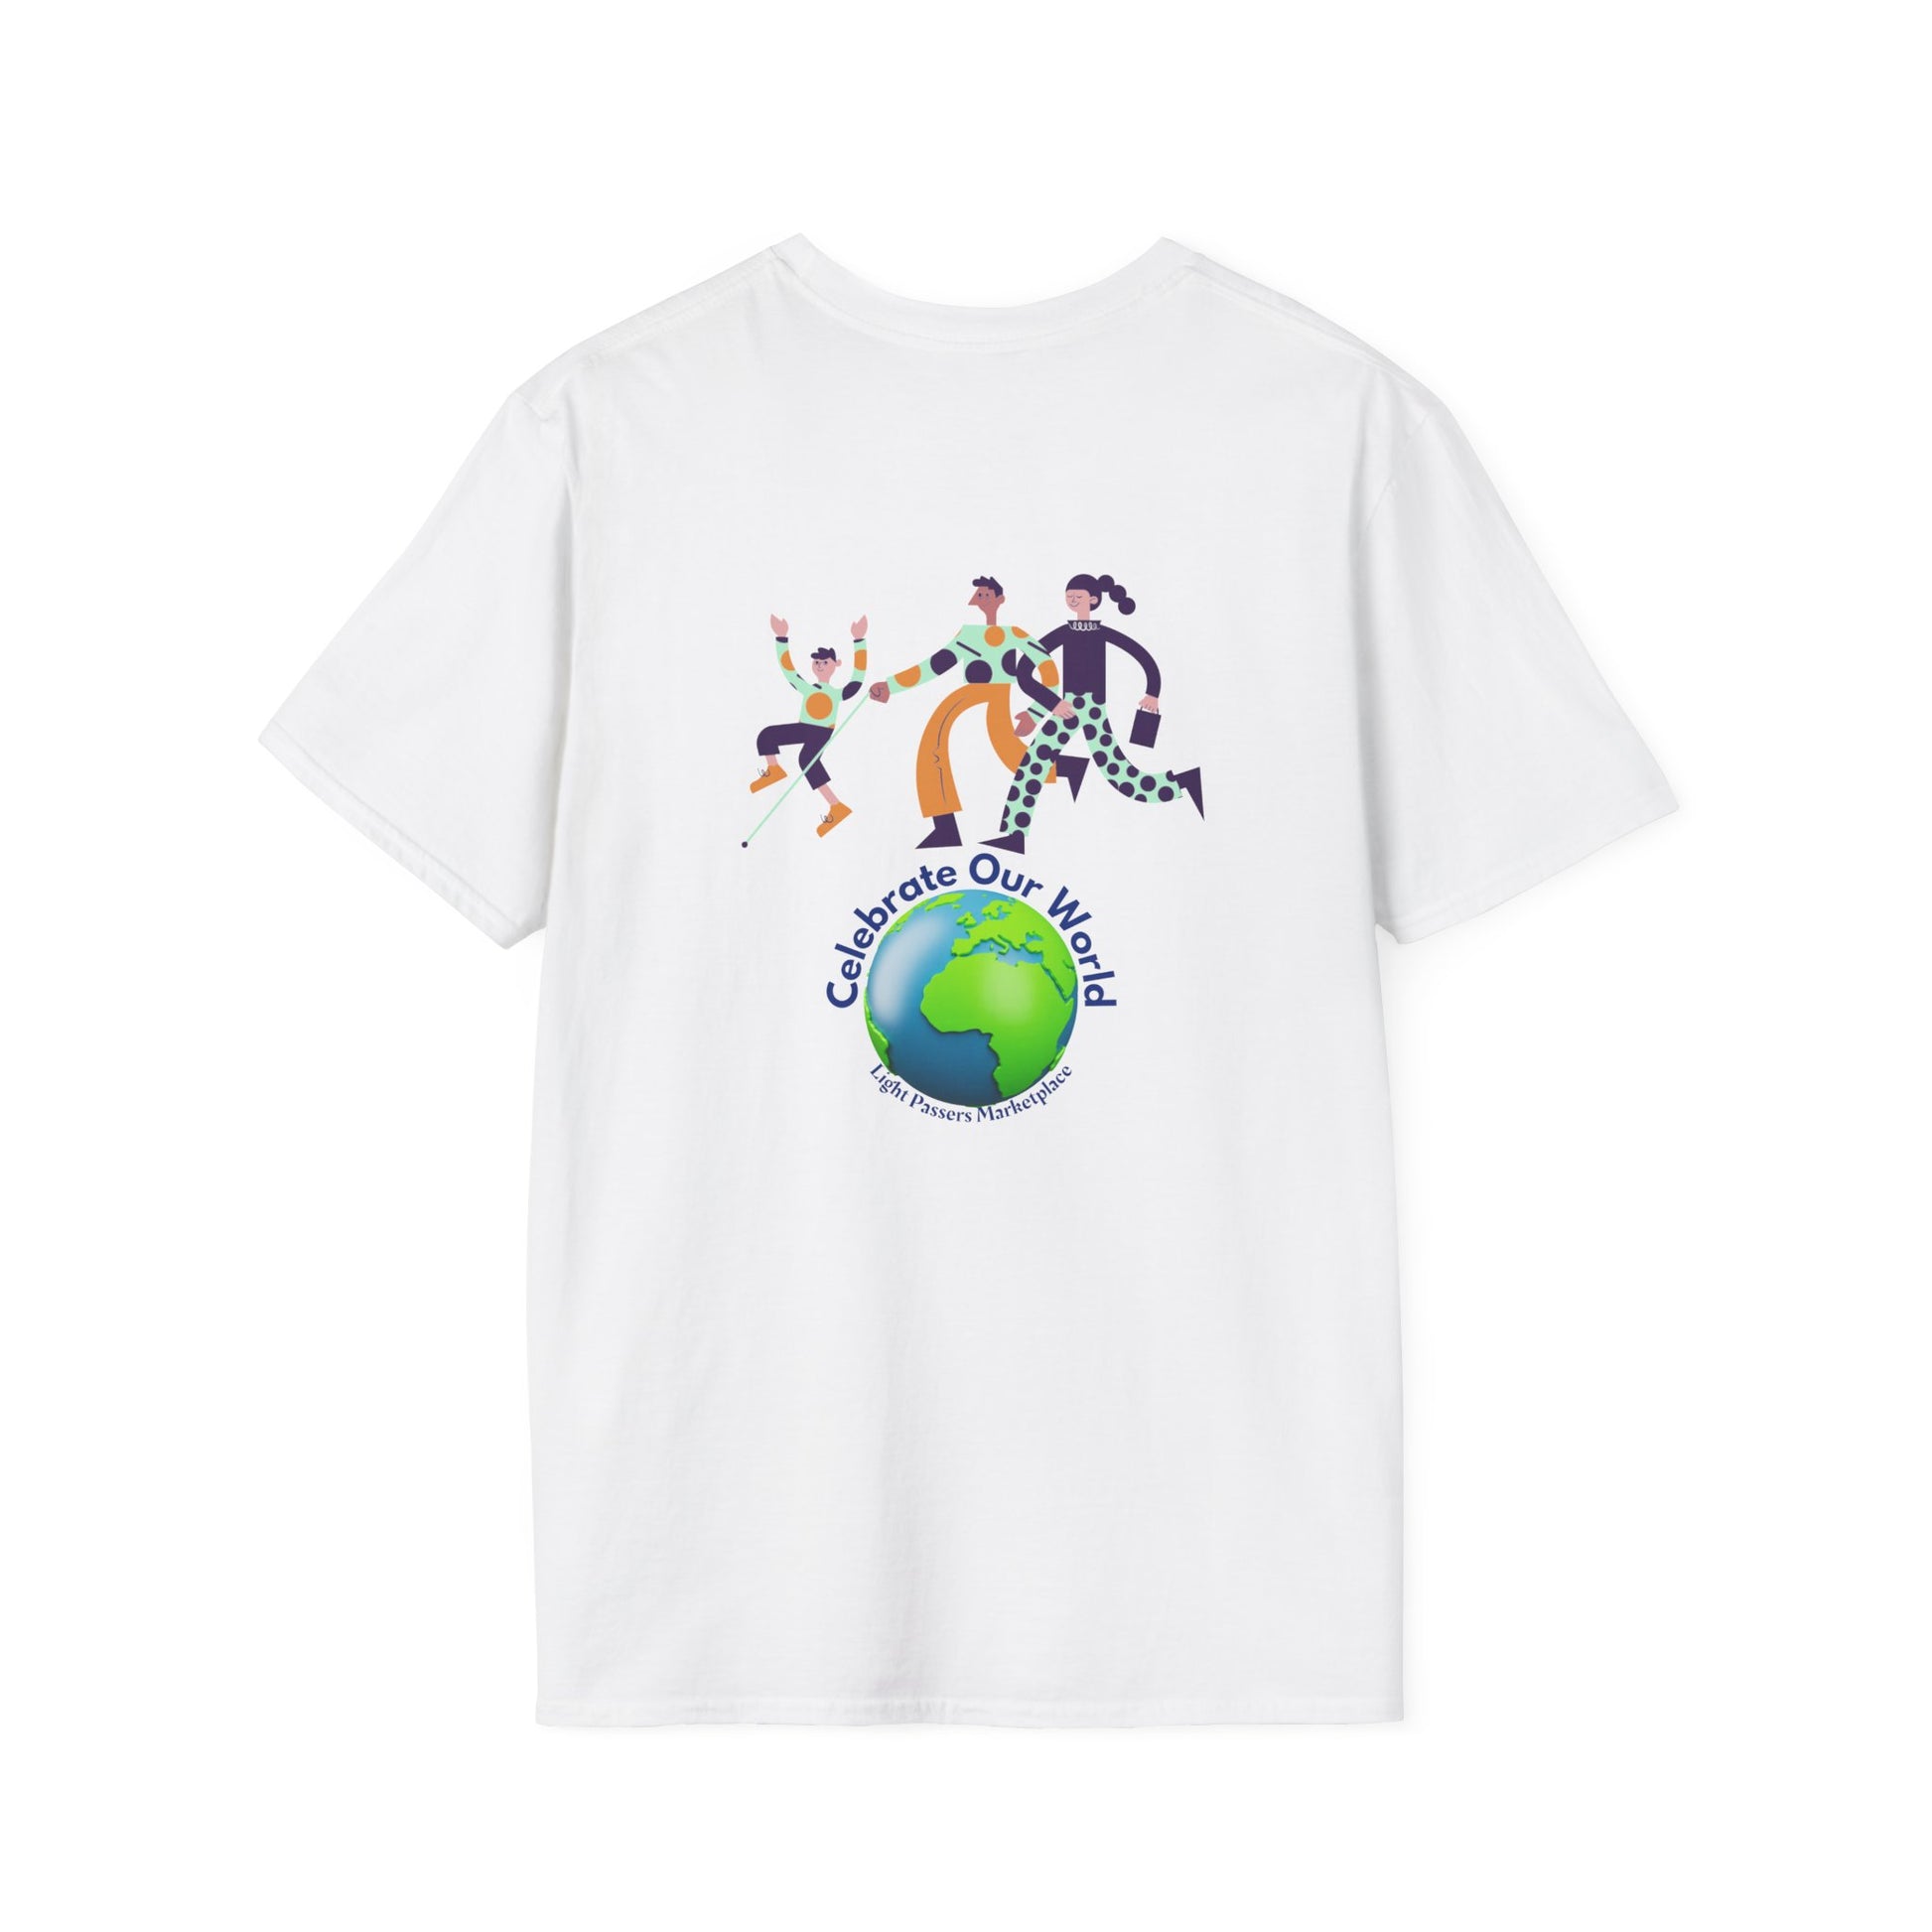 A white unisex t-shirt featuring a globe and dancing figures. Made of soft 100% cotton, with twill tape shoulders for durability and a ribbed collar. Ethically sourced and Oeko-Tex certified.